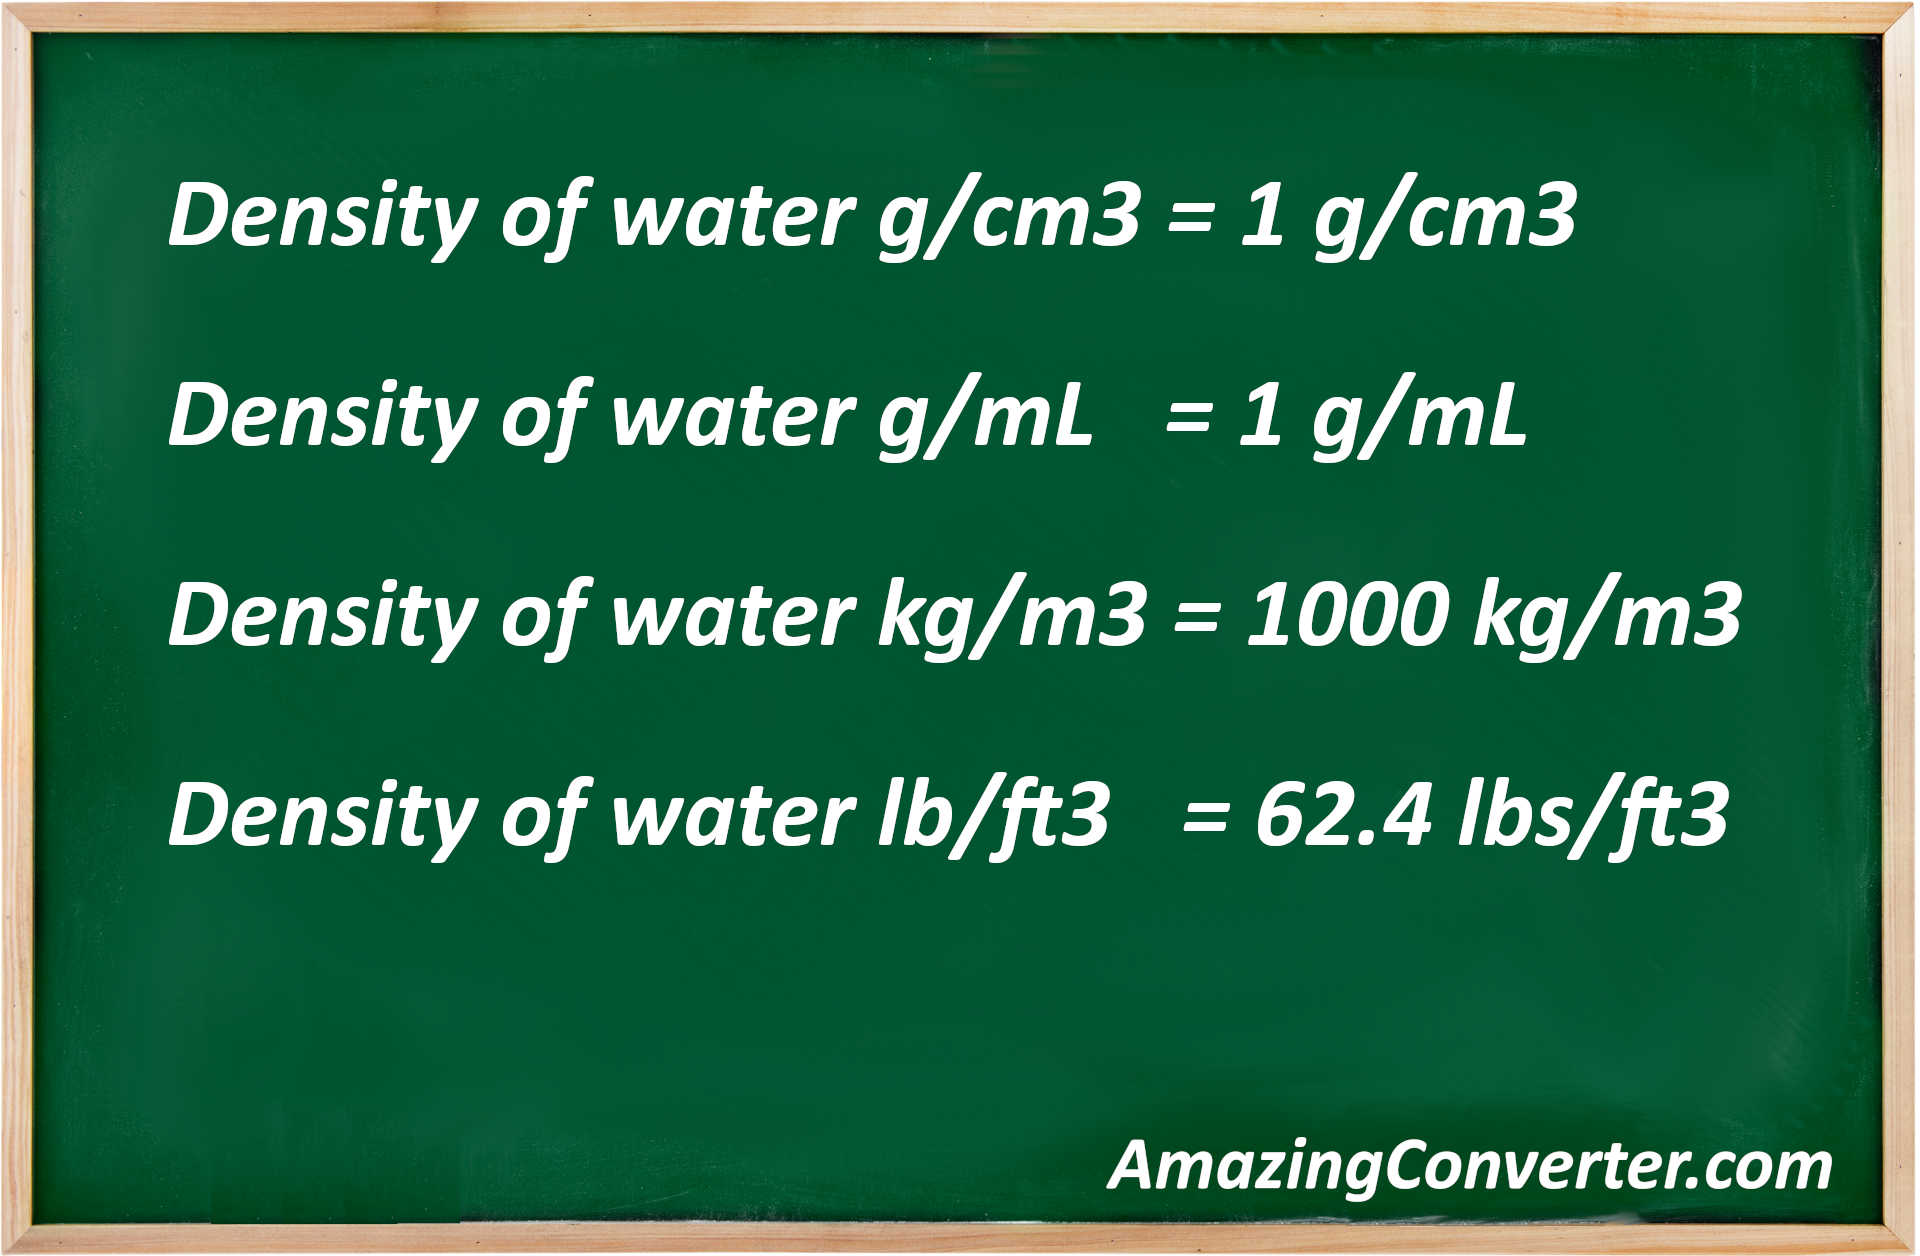 what affects the density of water